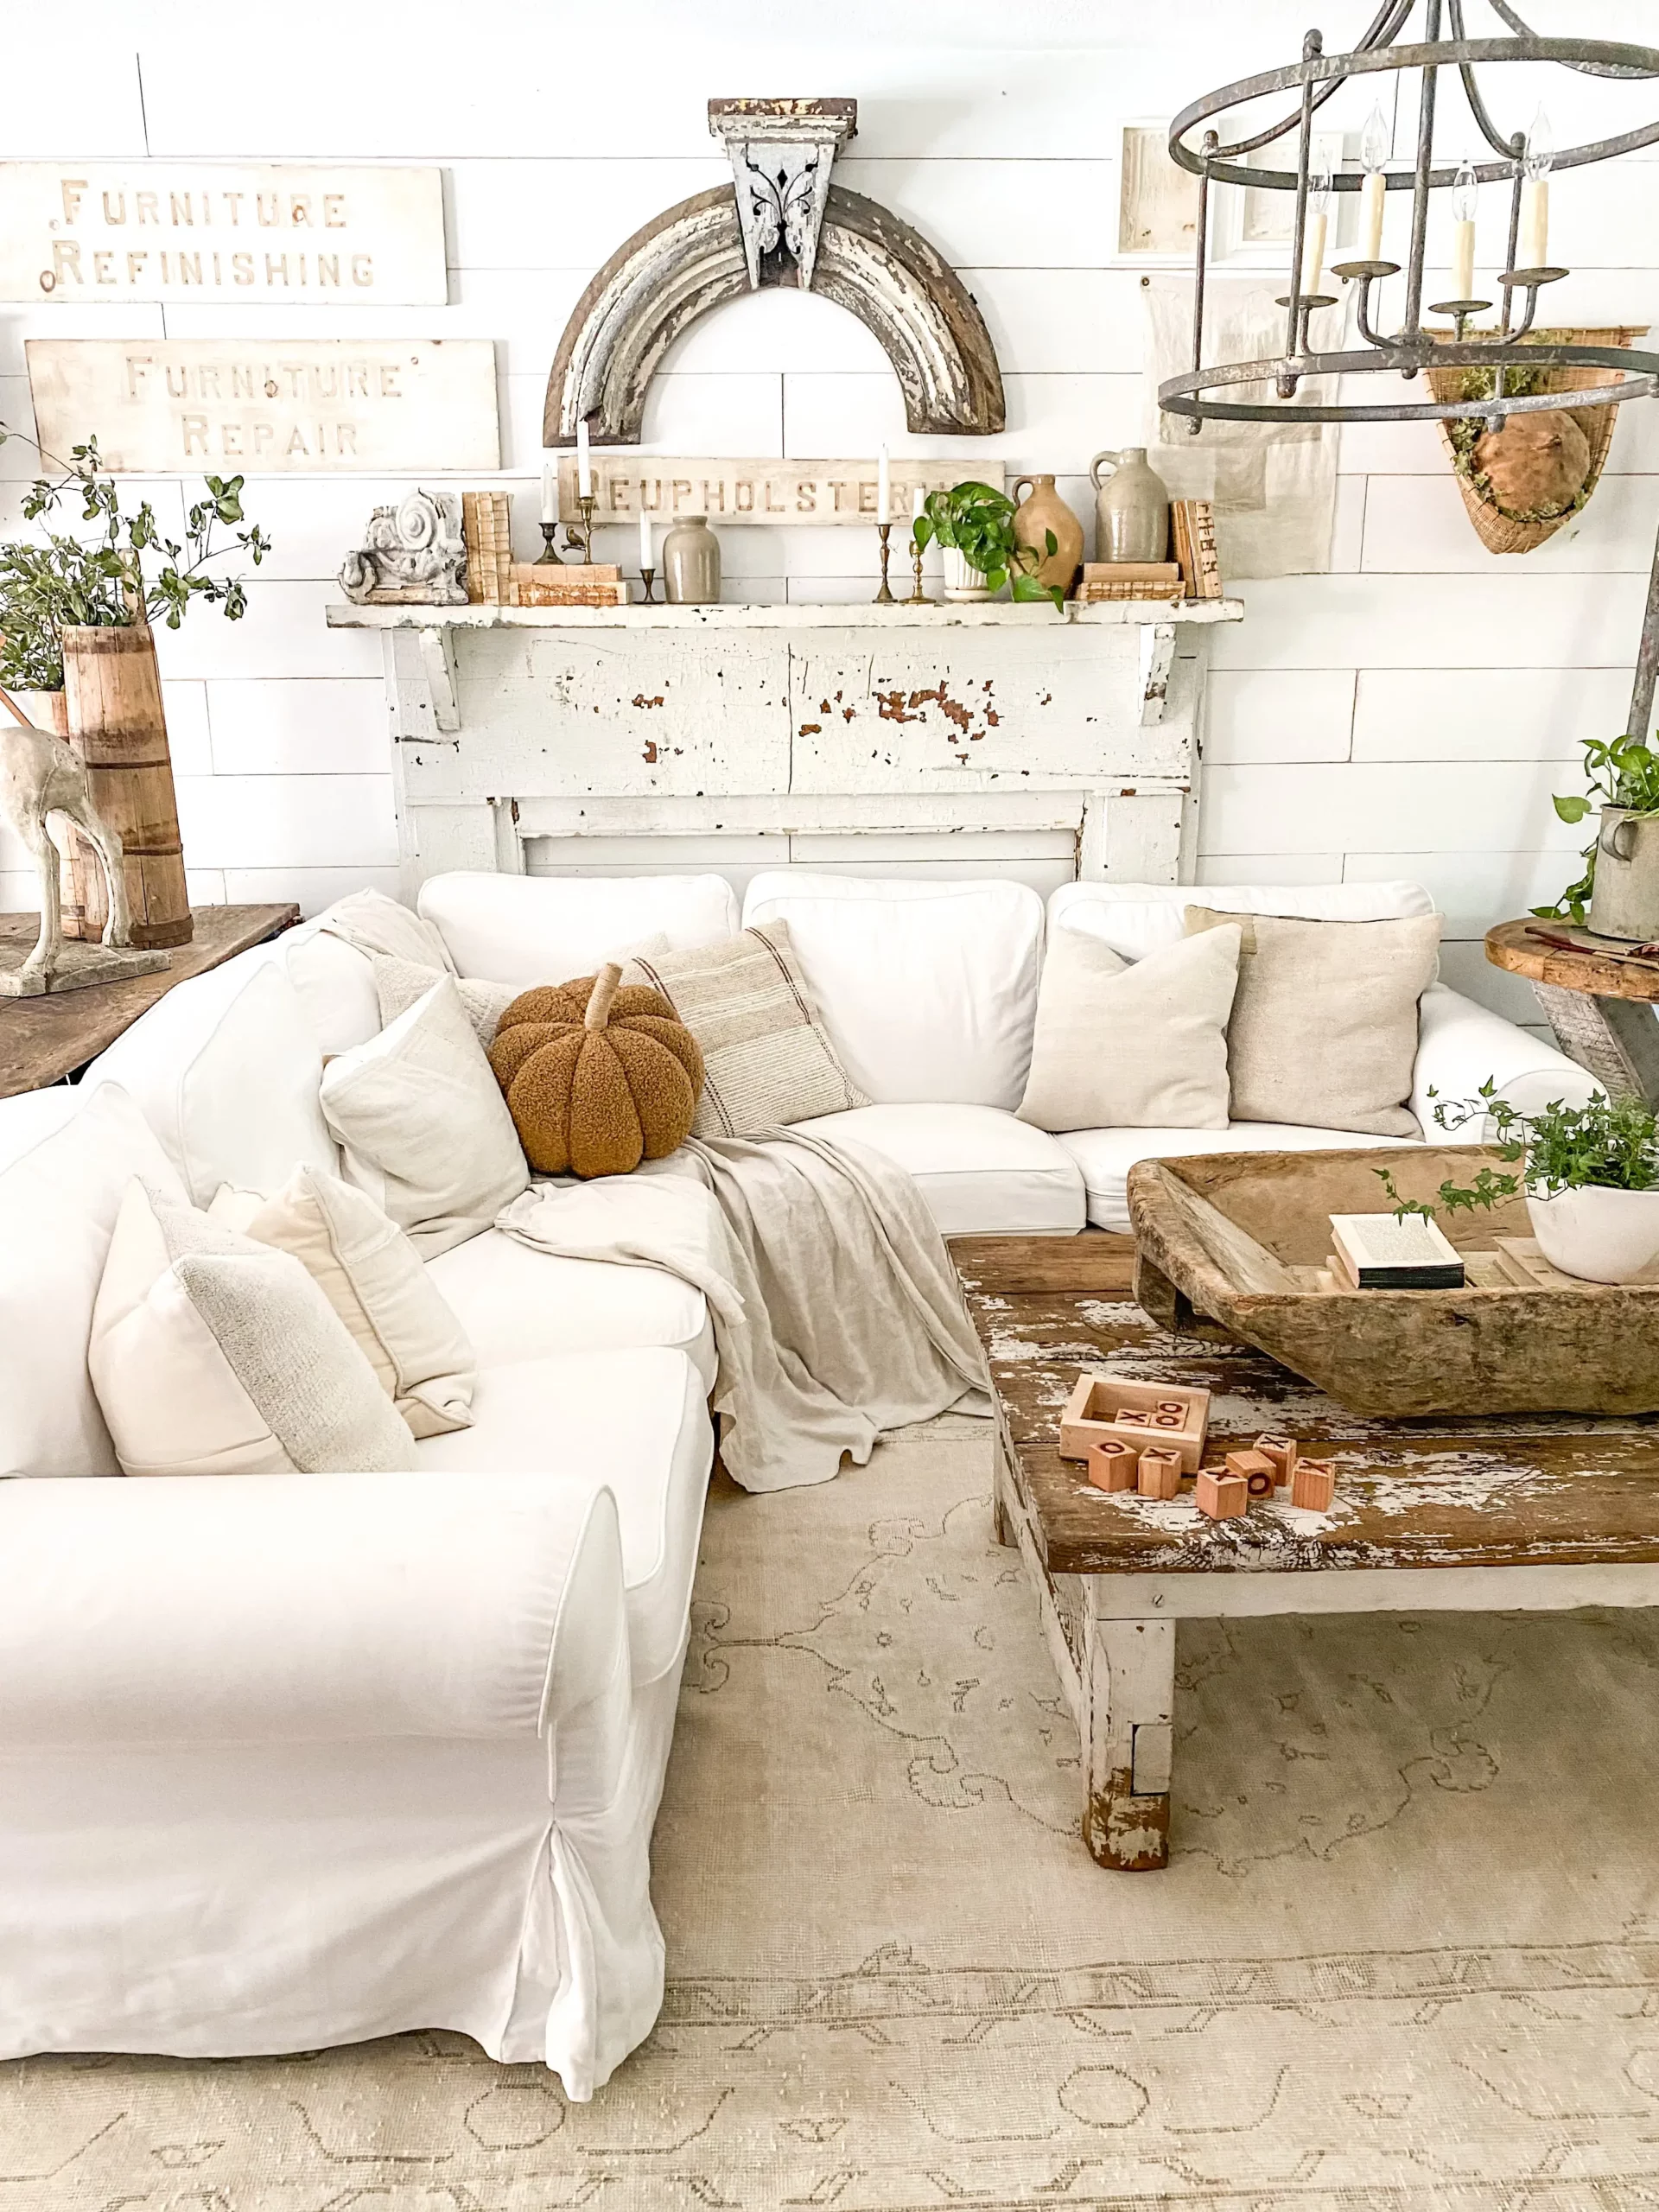 large chippy white architectural salvage hanging above a white mantel among various spring decor elements